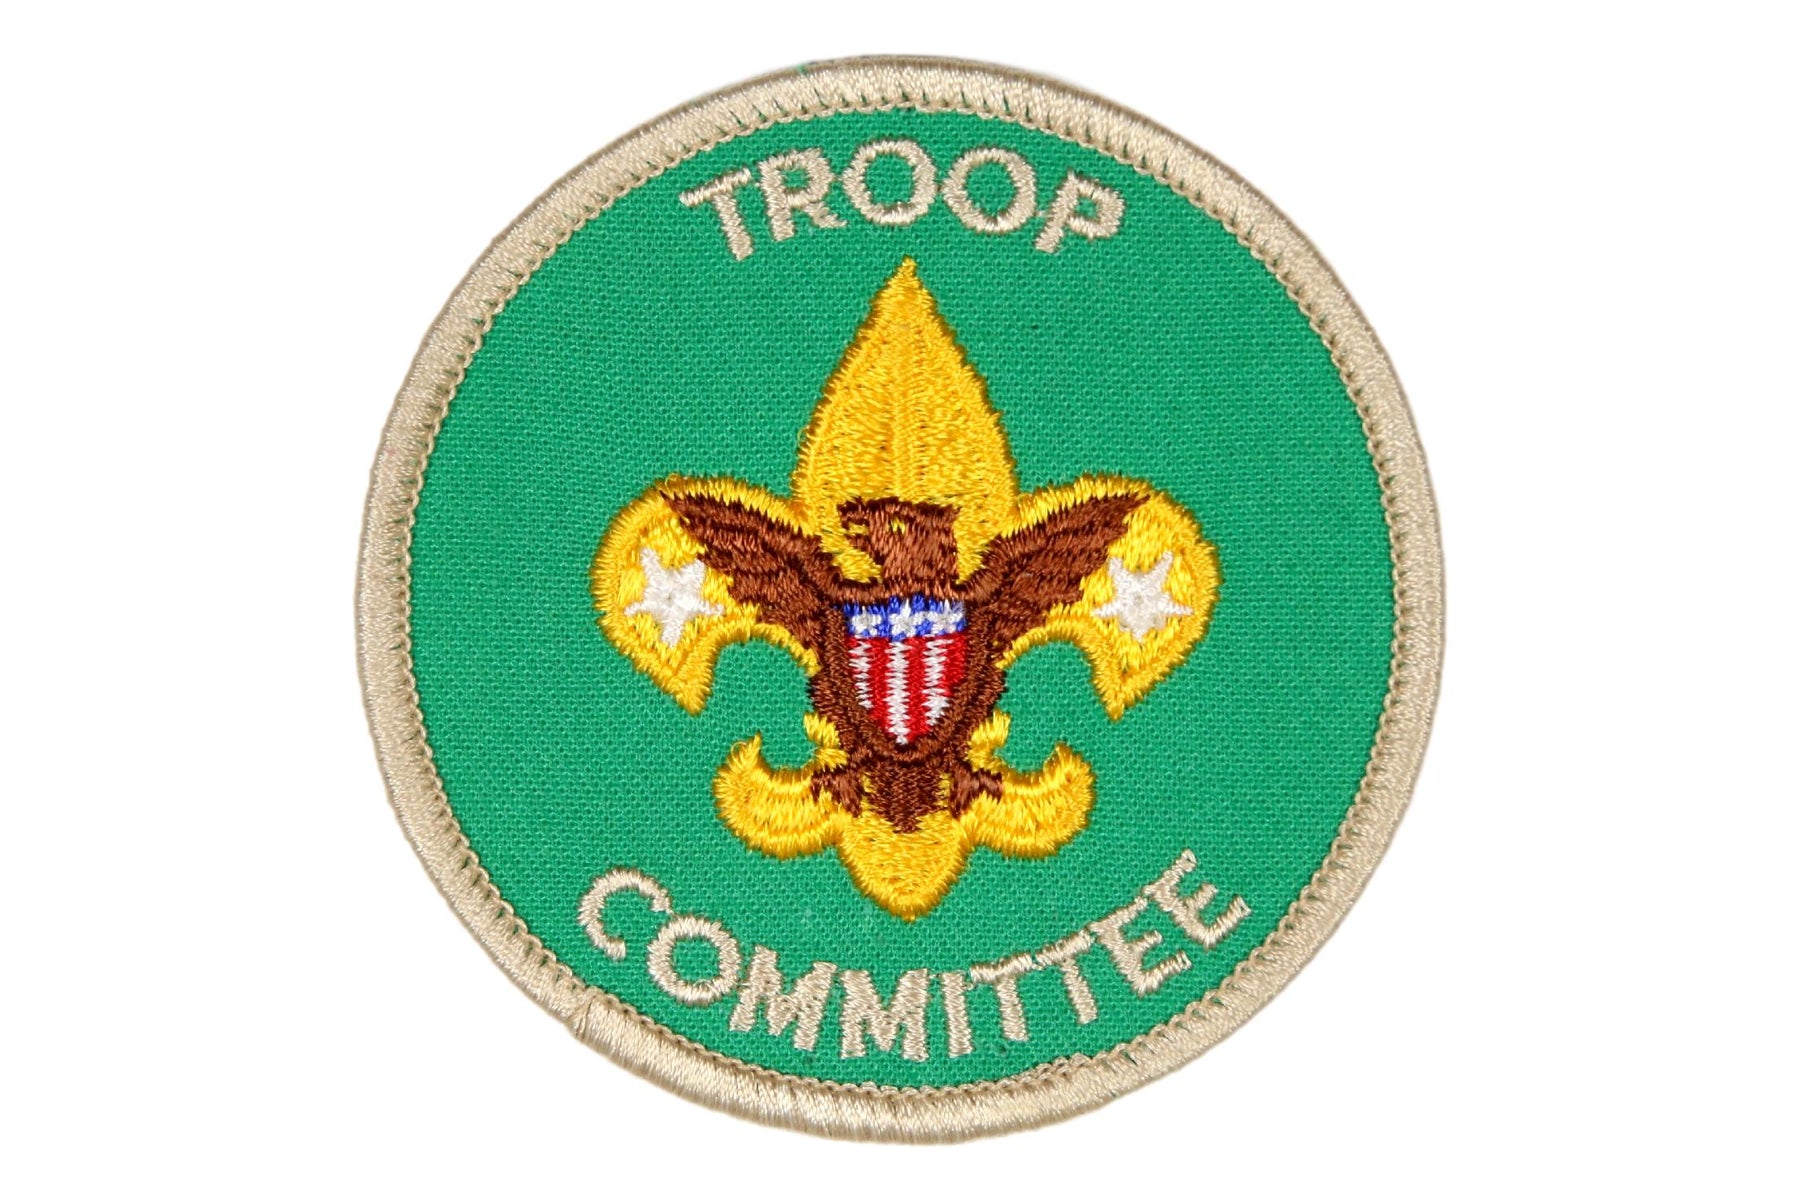 Troop Committee Patch 1970s Clear Plastic Back